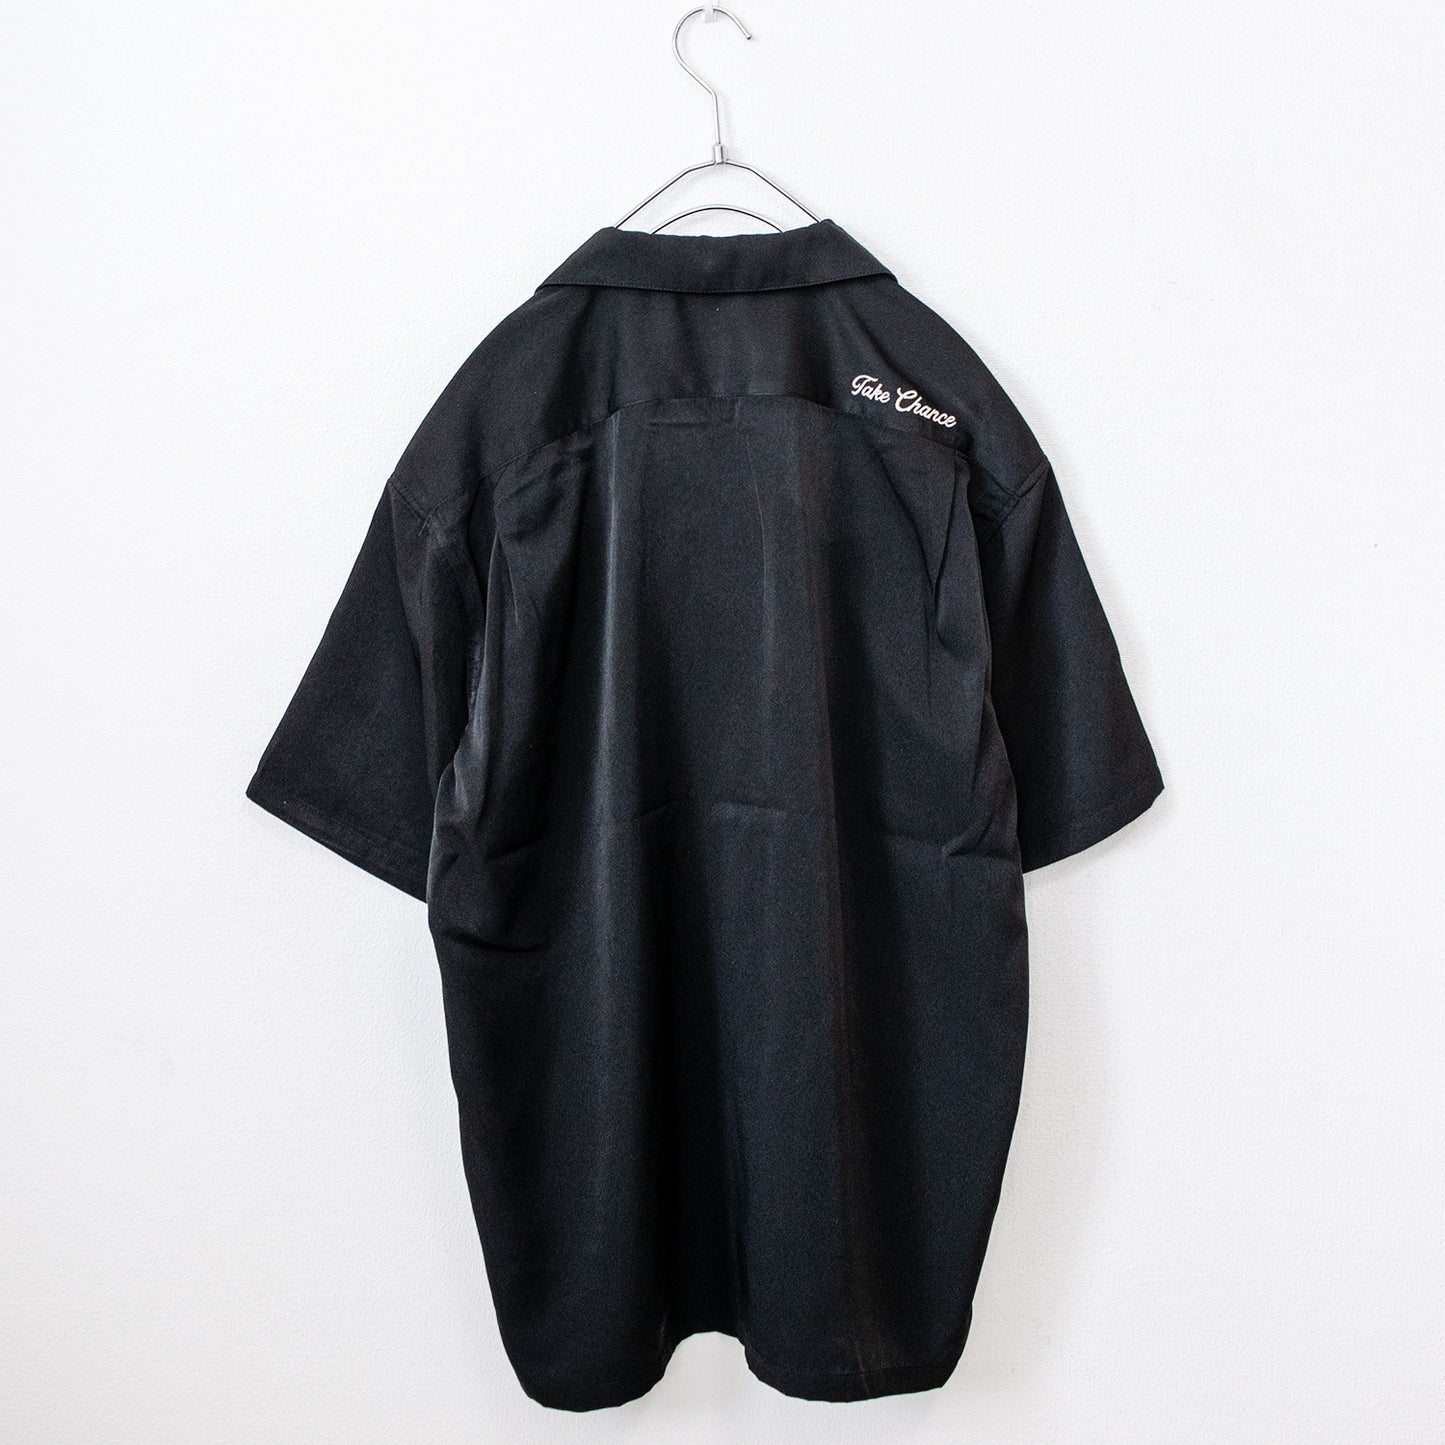 Cactus Guadalupe Open Collar Embroidery S/S Shirt - YOUAREMYPOISON